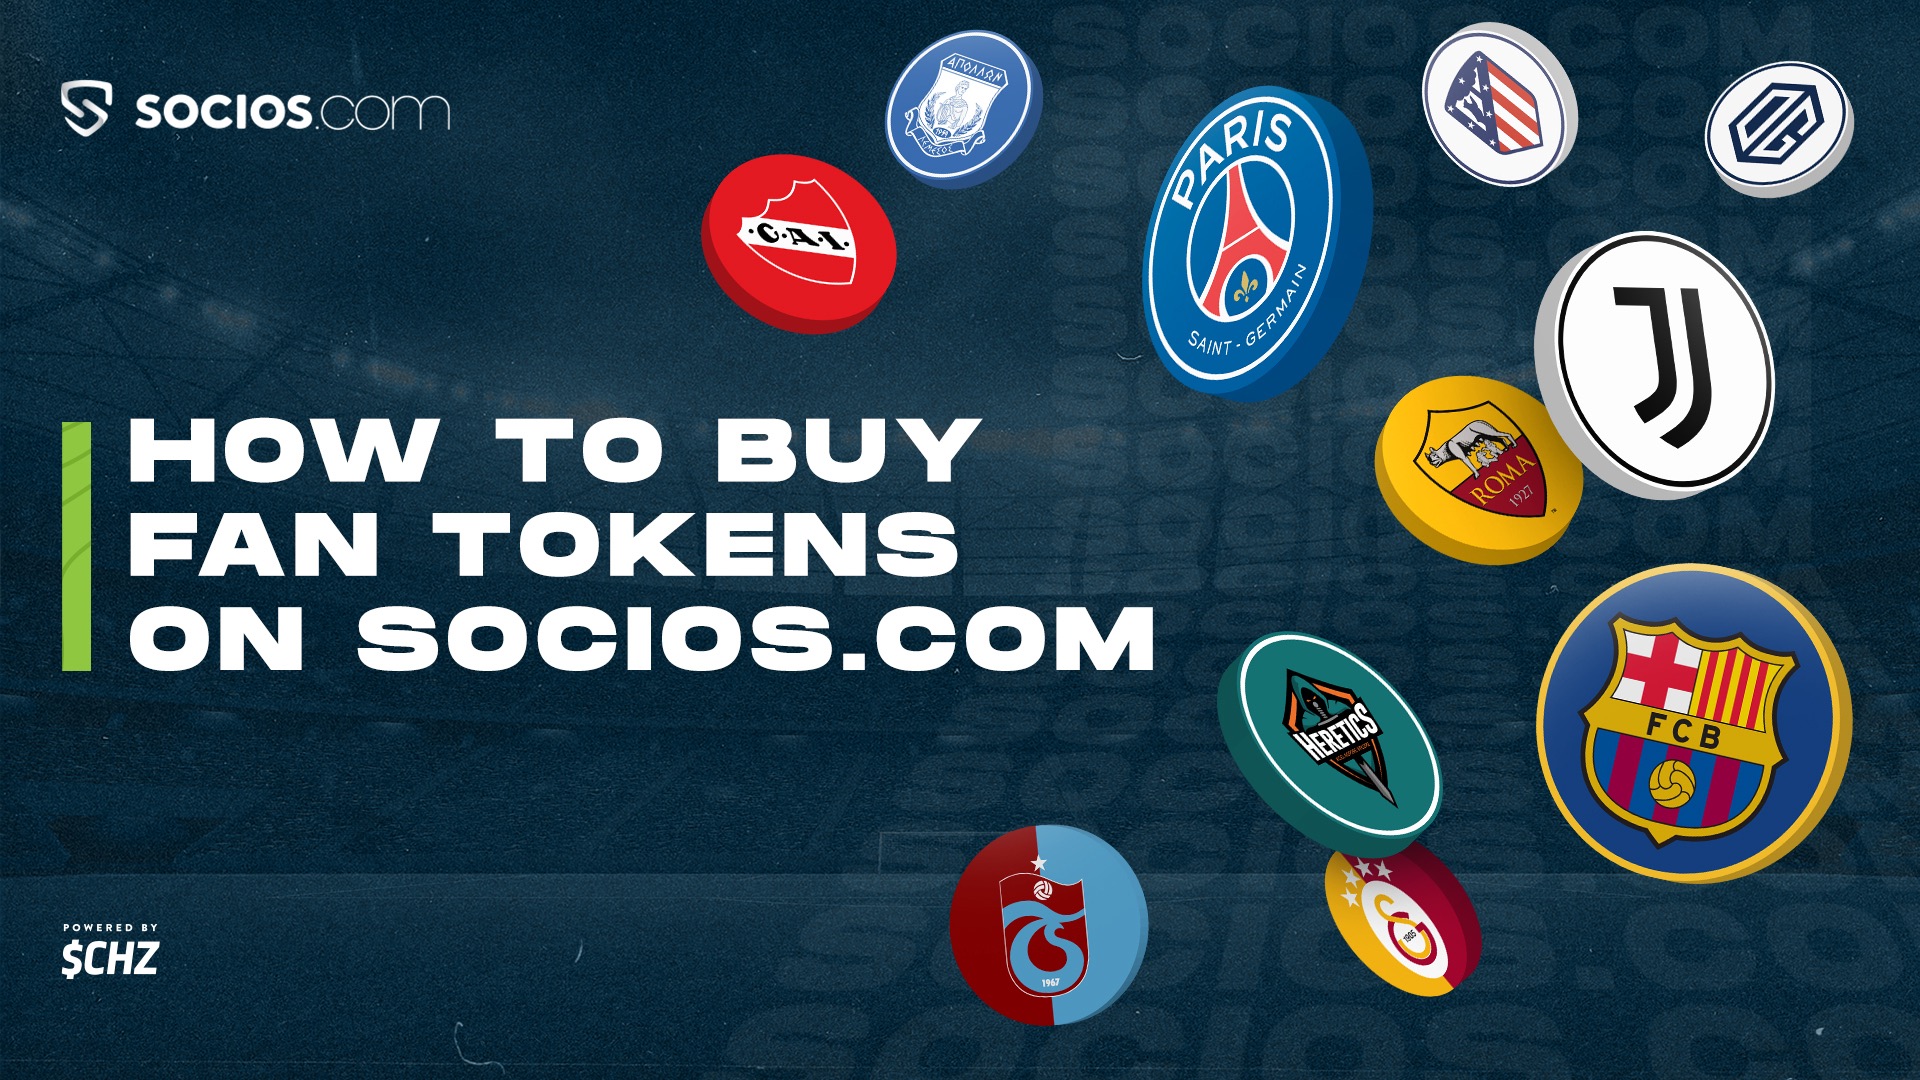 Fan tokens to buy on socios.com